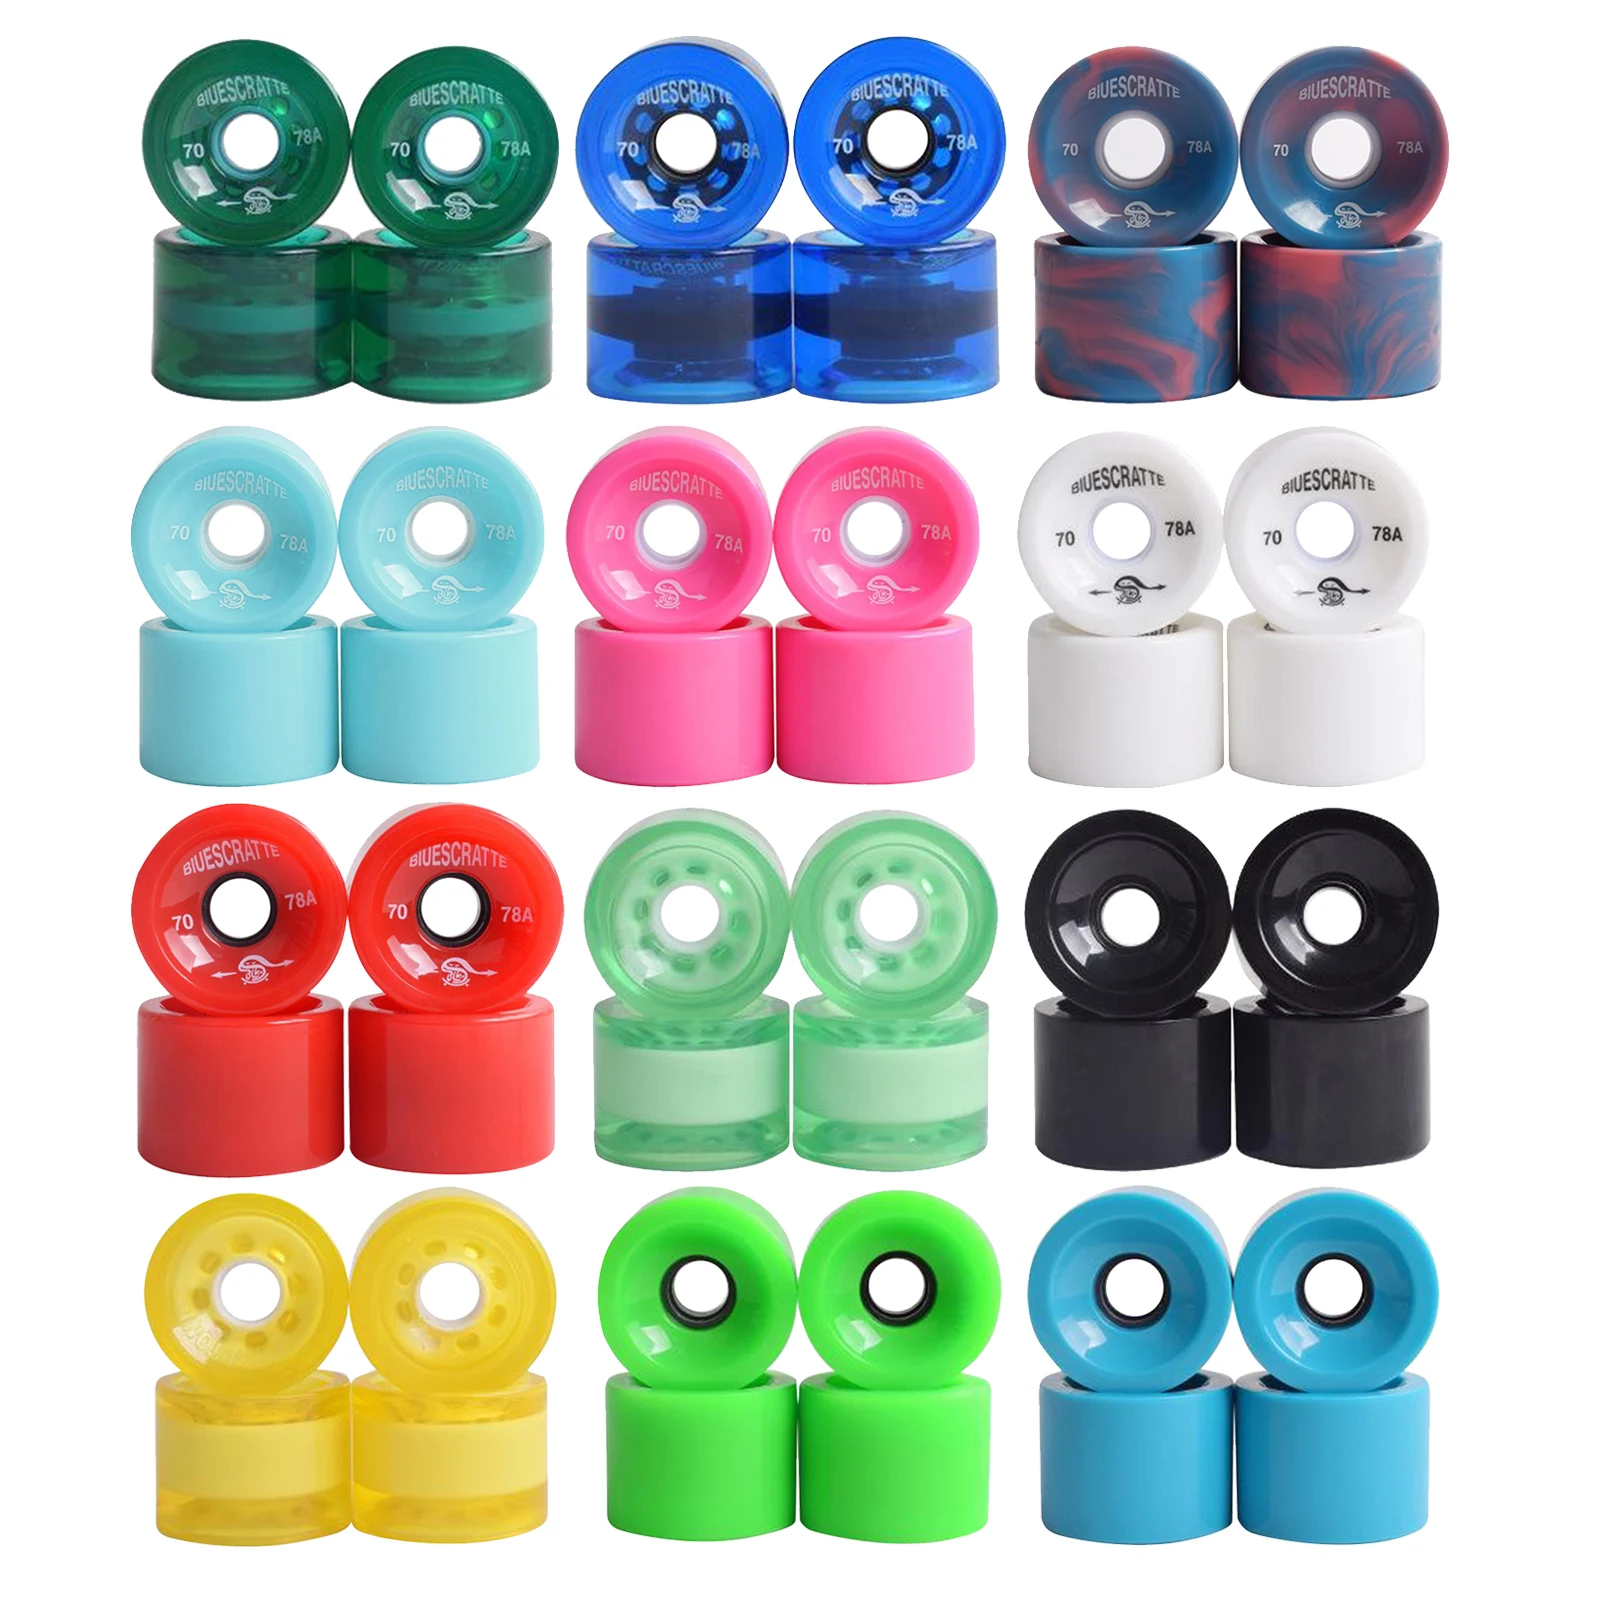 4 Pieces Skateboard Wheels Longboard Roller 78A Hardness Parts Accessories